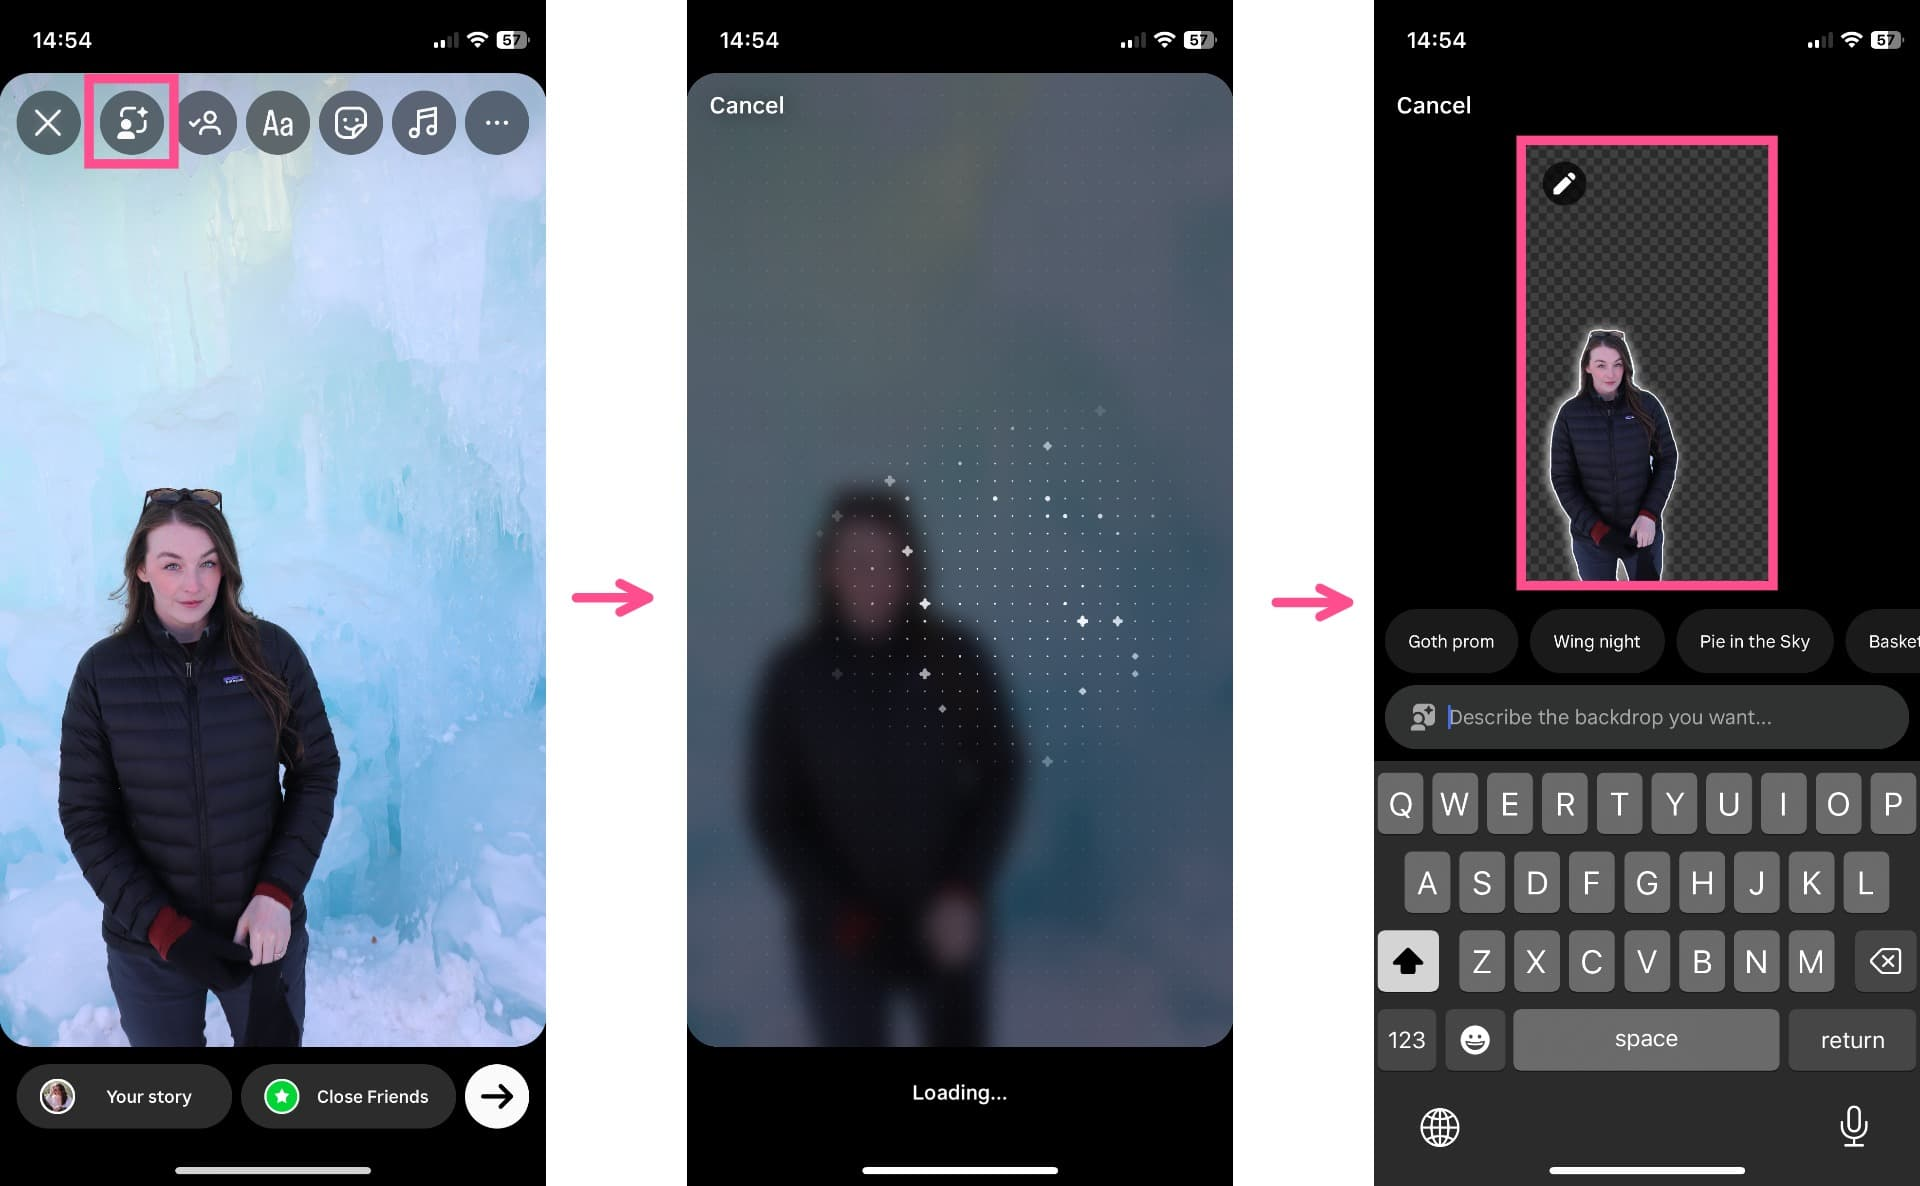 How to Change the Background Color on an Instagram Story